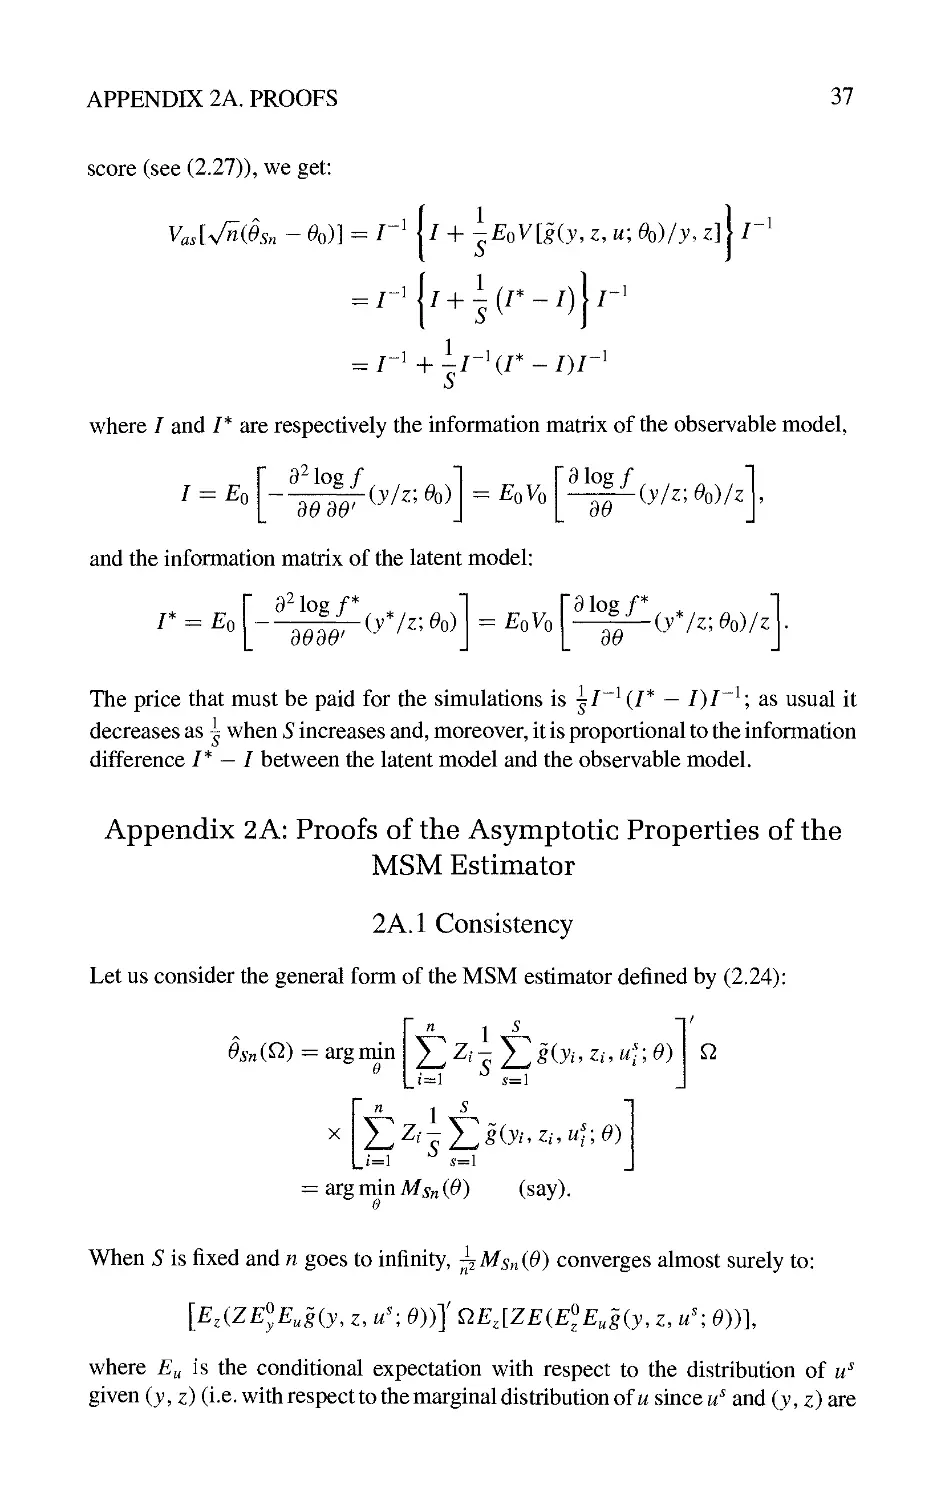 Appendix 2A: Proofs of the Asymptotic Properties of the MSM Estimator